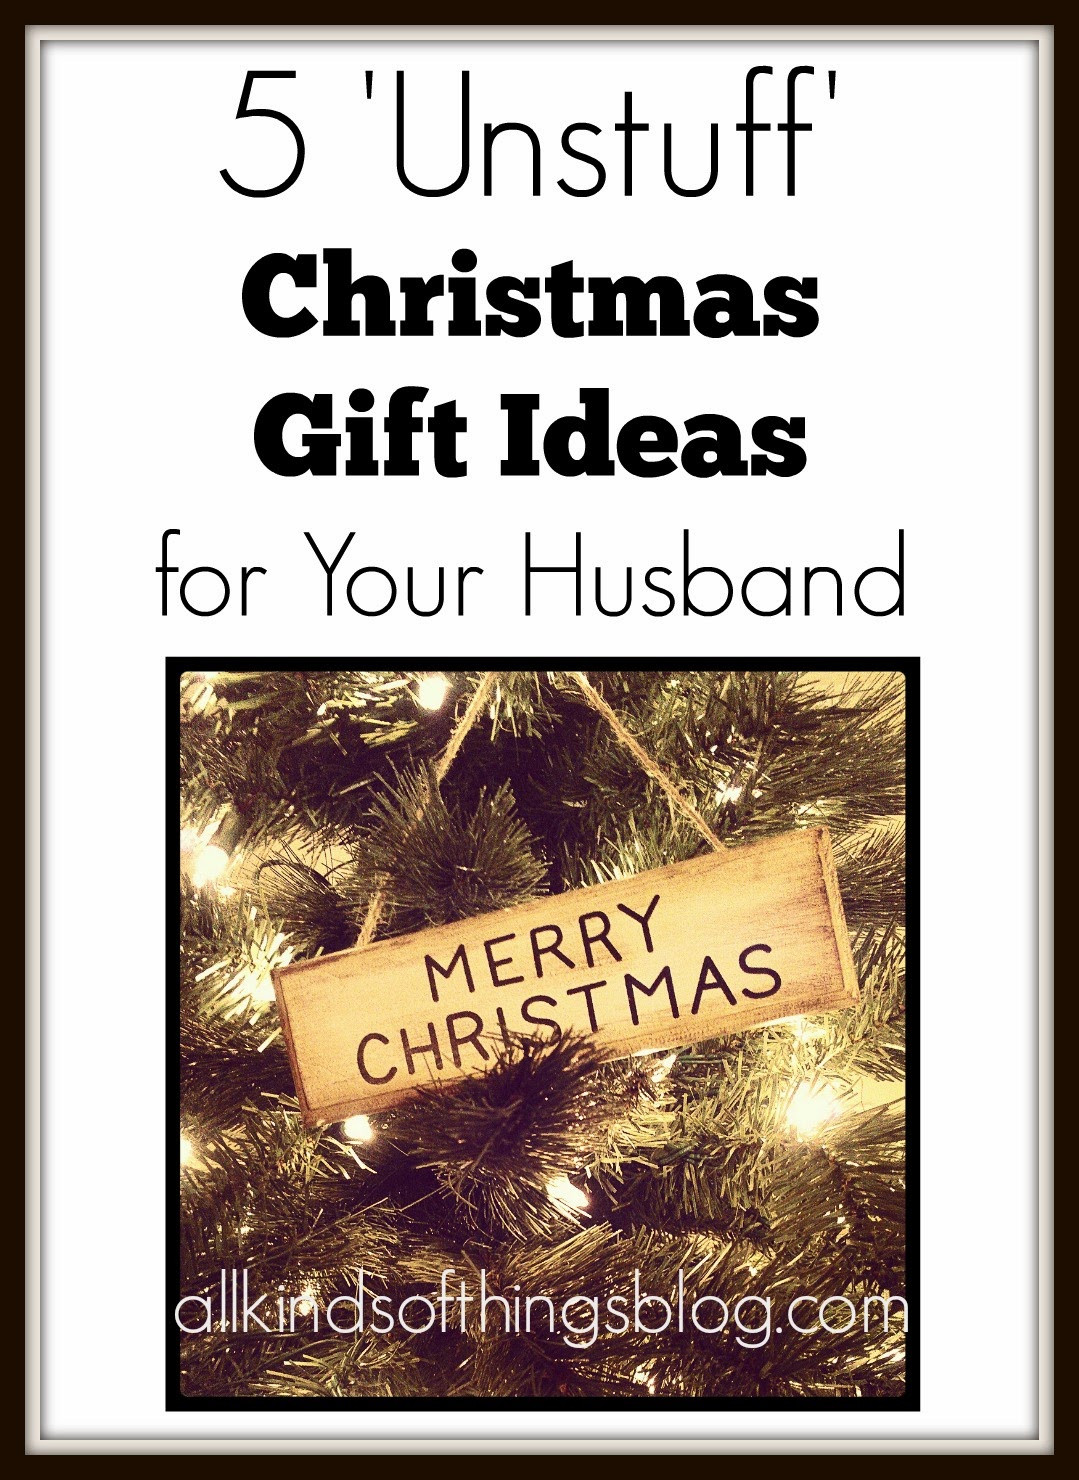 Holiday Gift Ideas For Husband
 All Kinds of Things 5 Unstuff Christmas Gift Ideas for